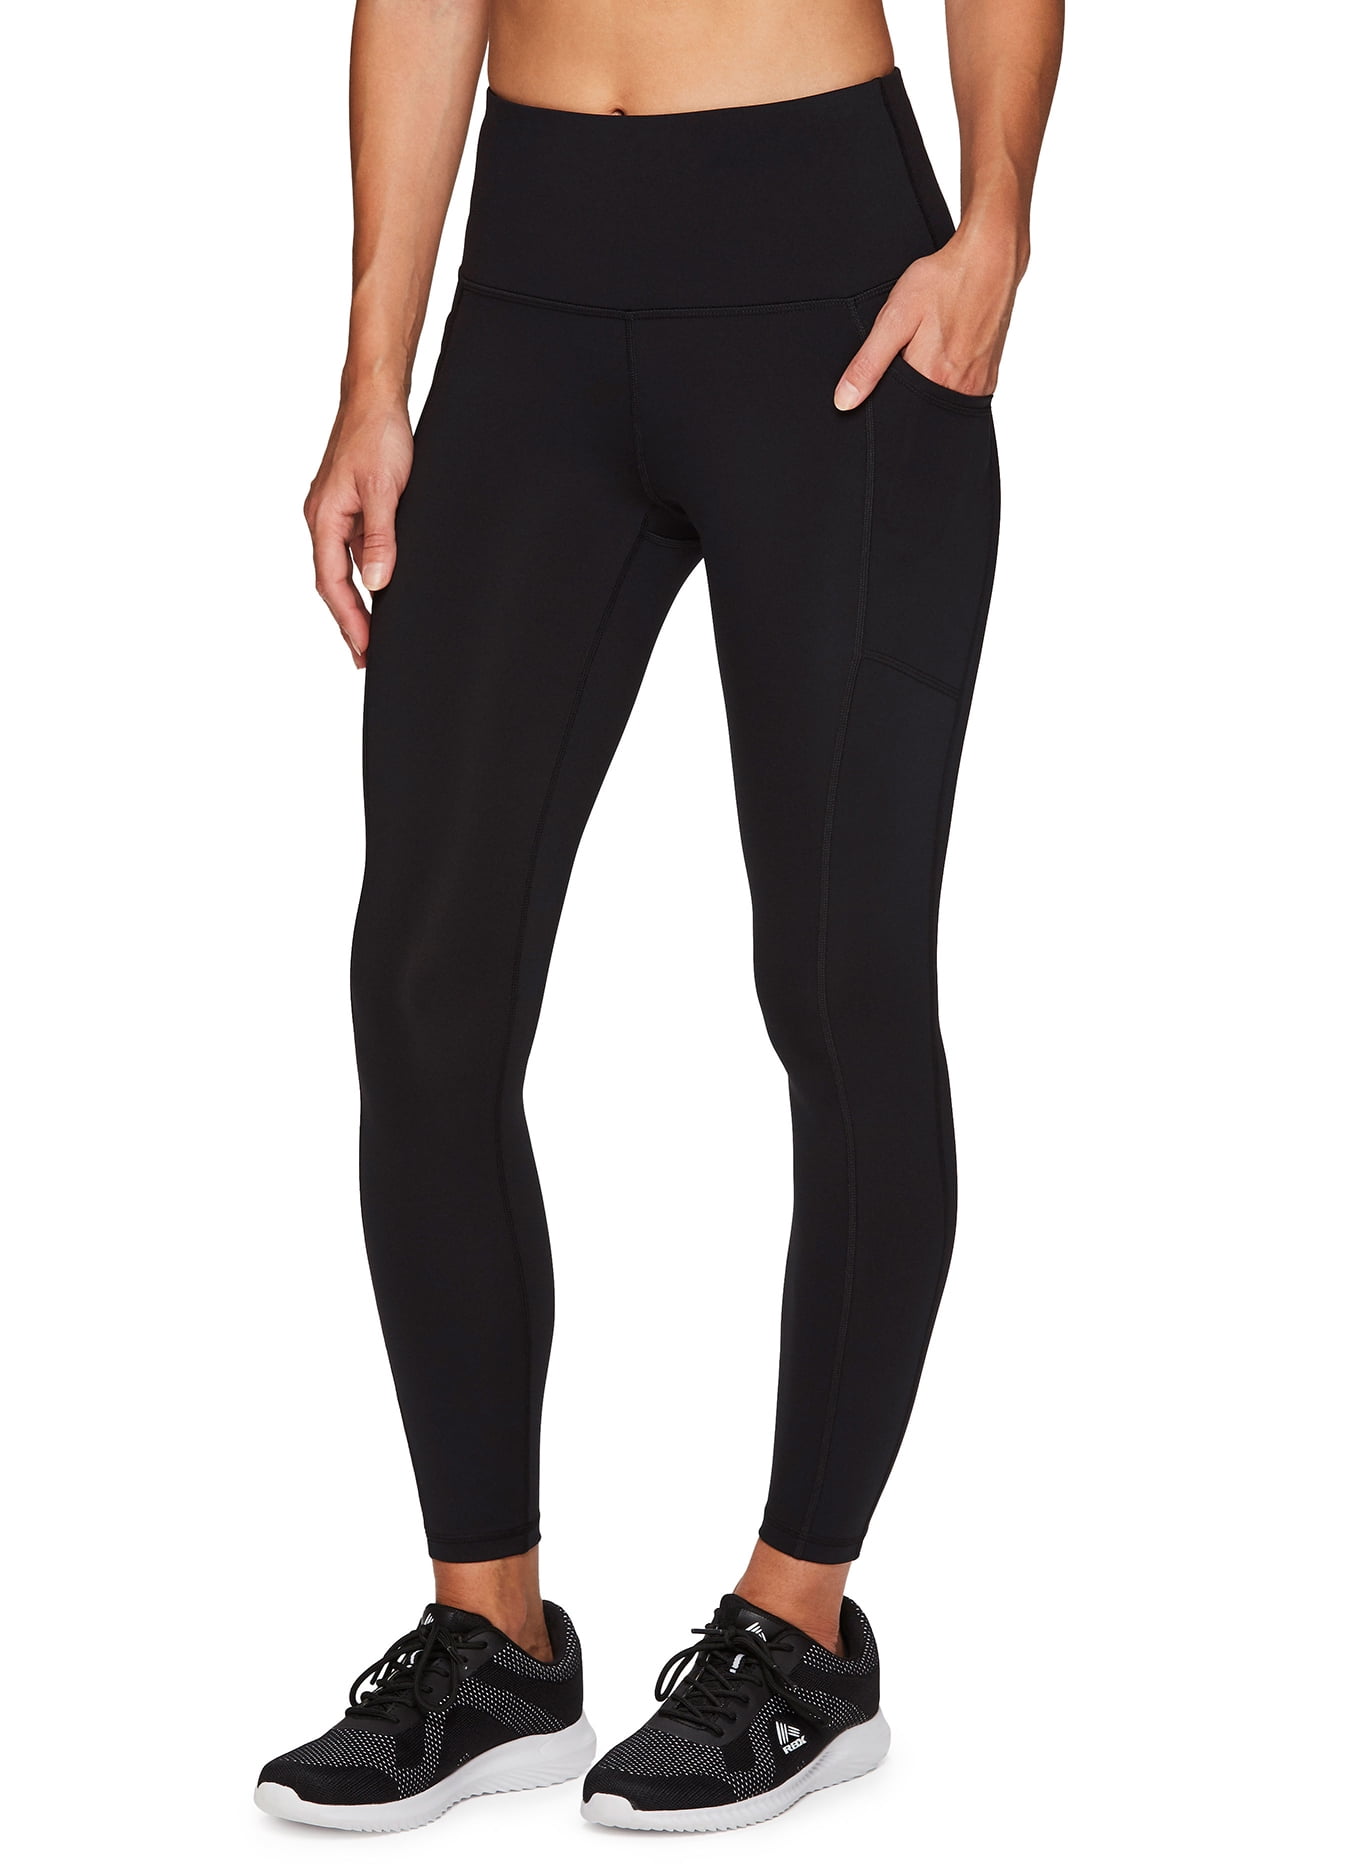 Shape Up Kickboxing Crossover leggings with pockets